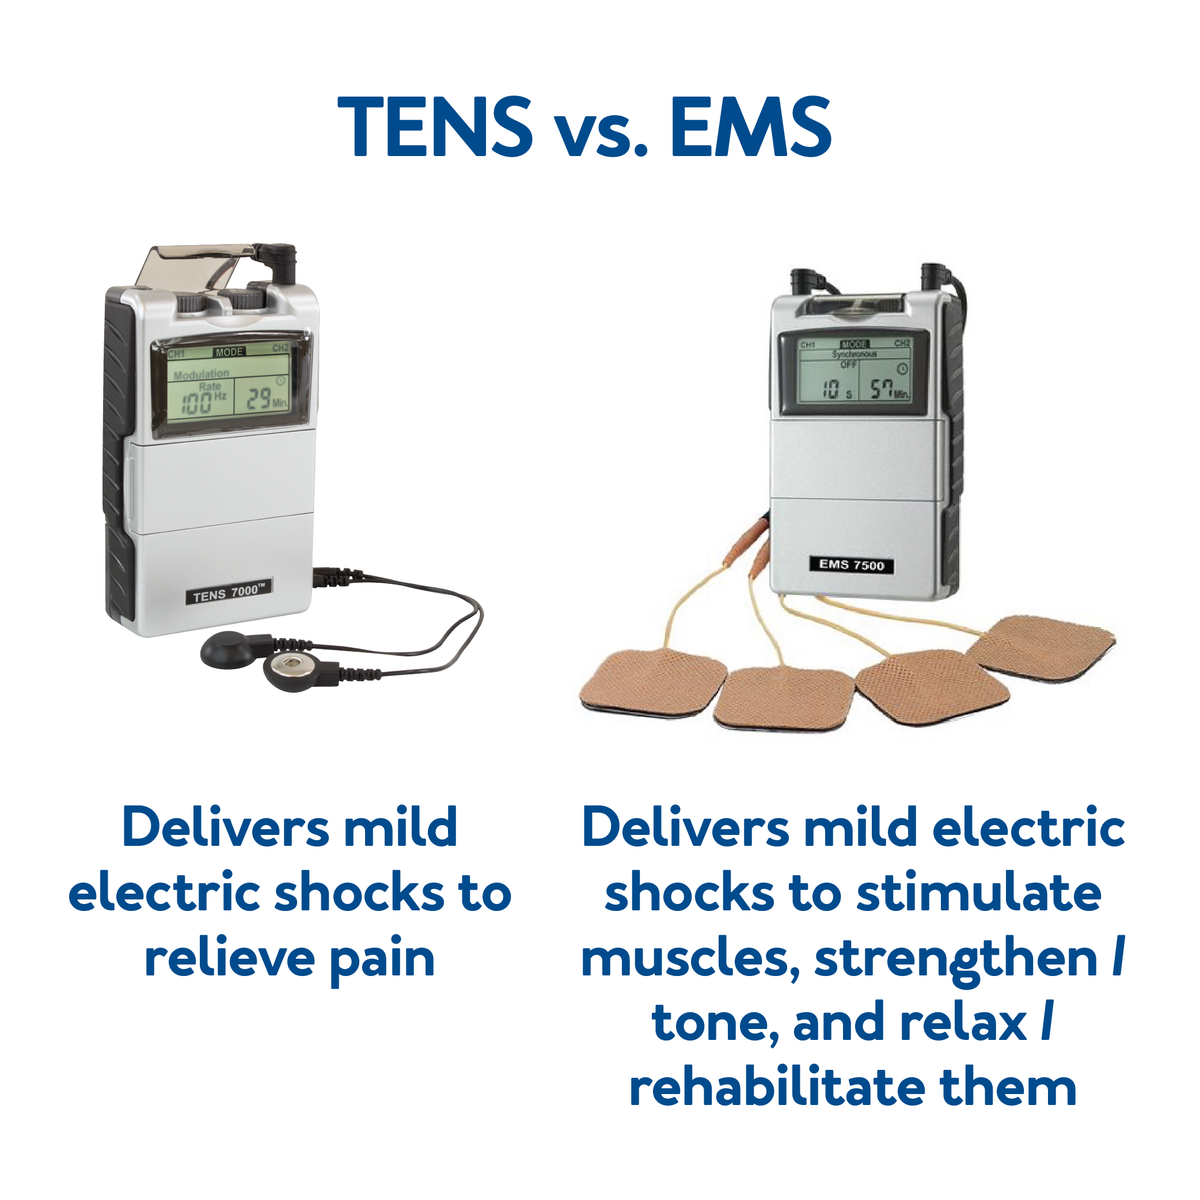 A Graphics of TENS vs. EMS with text further details are provided below.